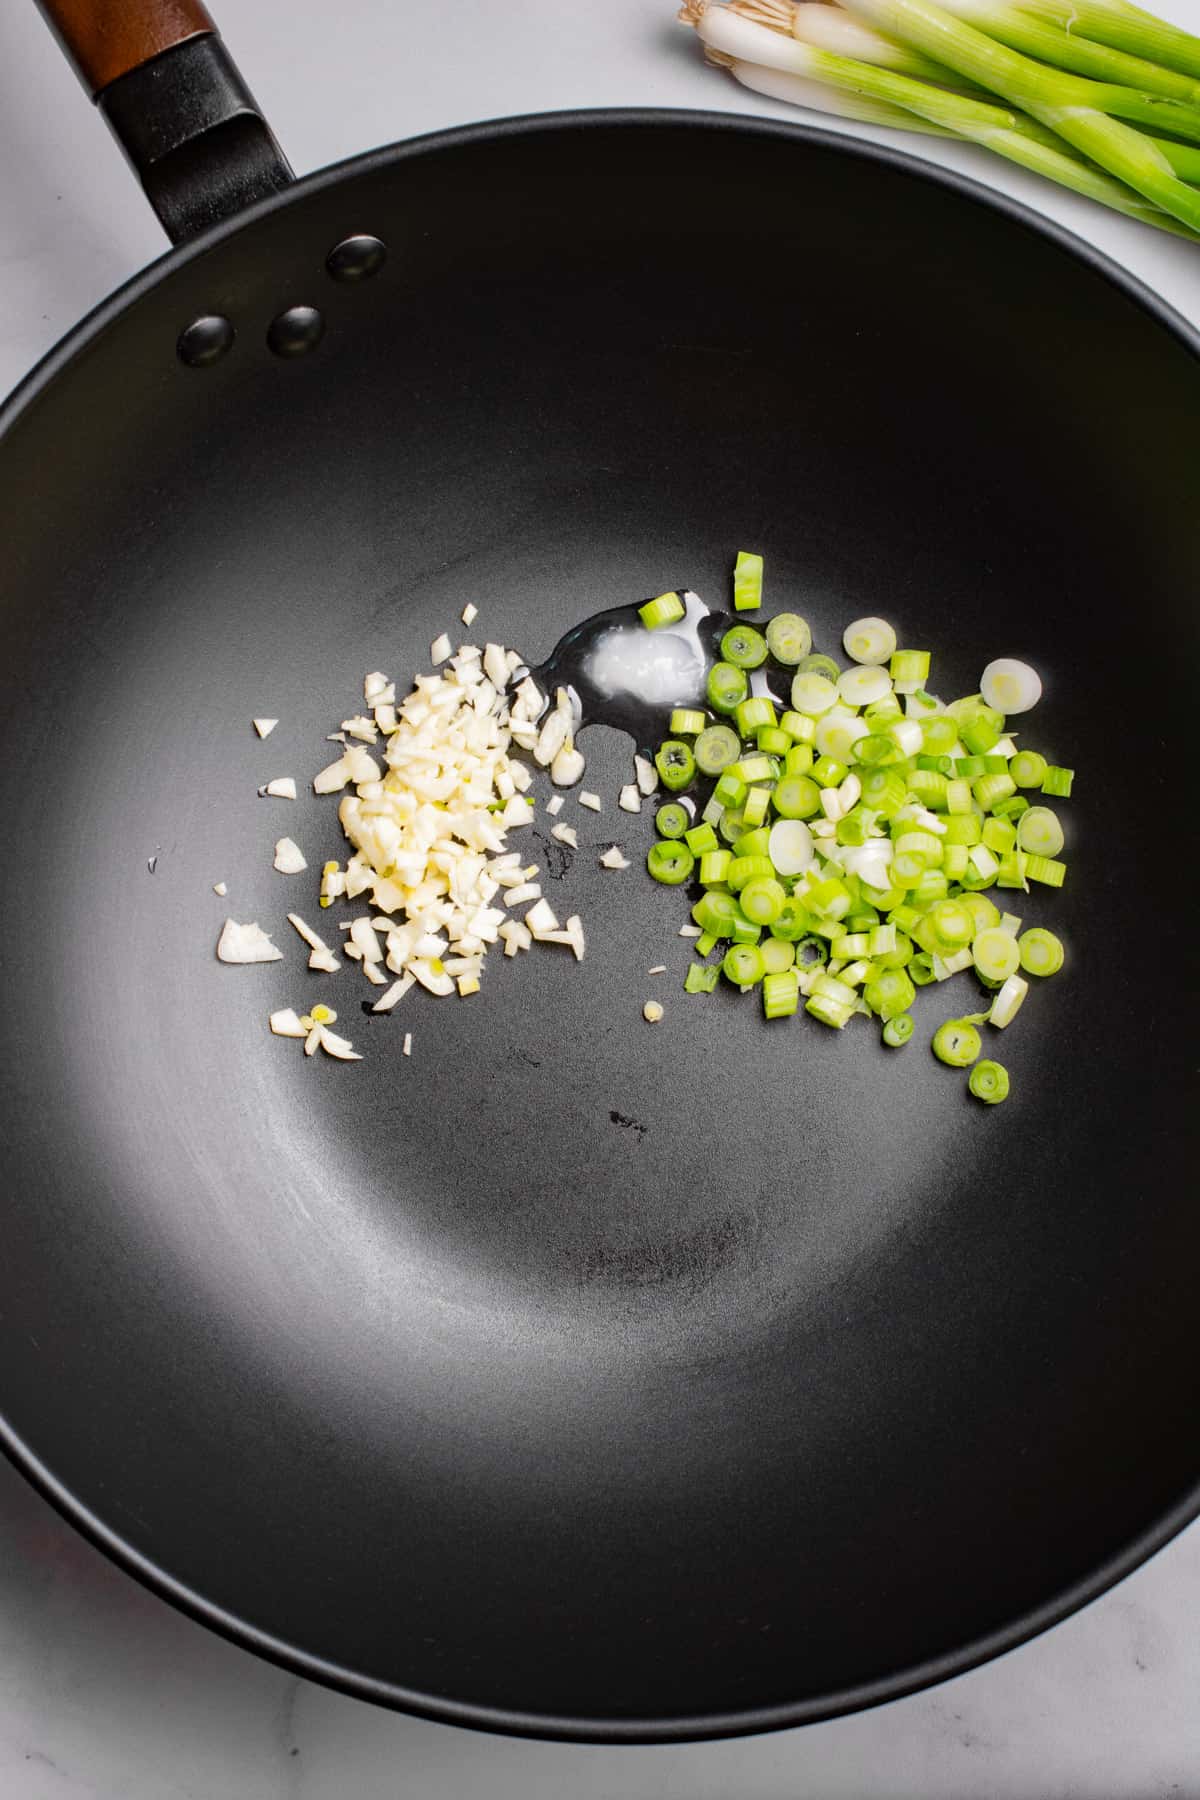 minced garlic, chopped green onion, and oil in a wok.